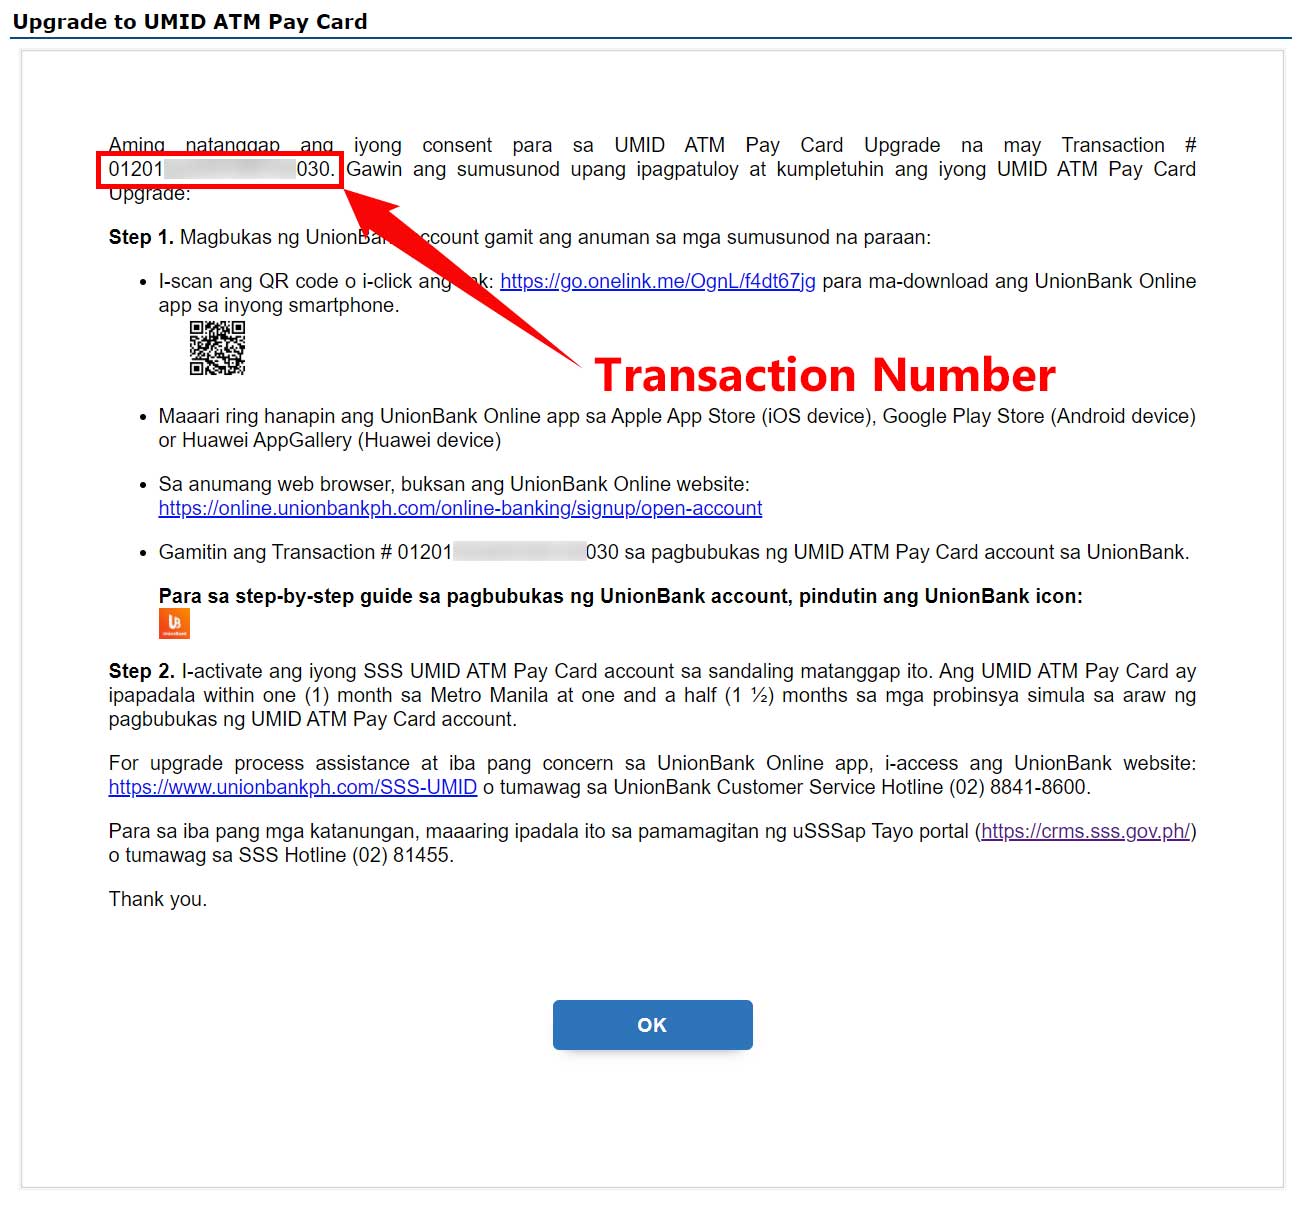 UMID ATM Pay Card transaction number